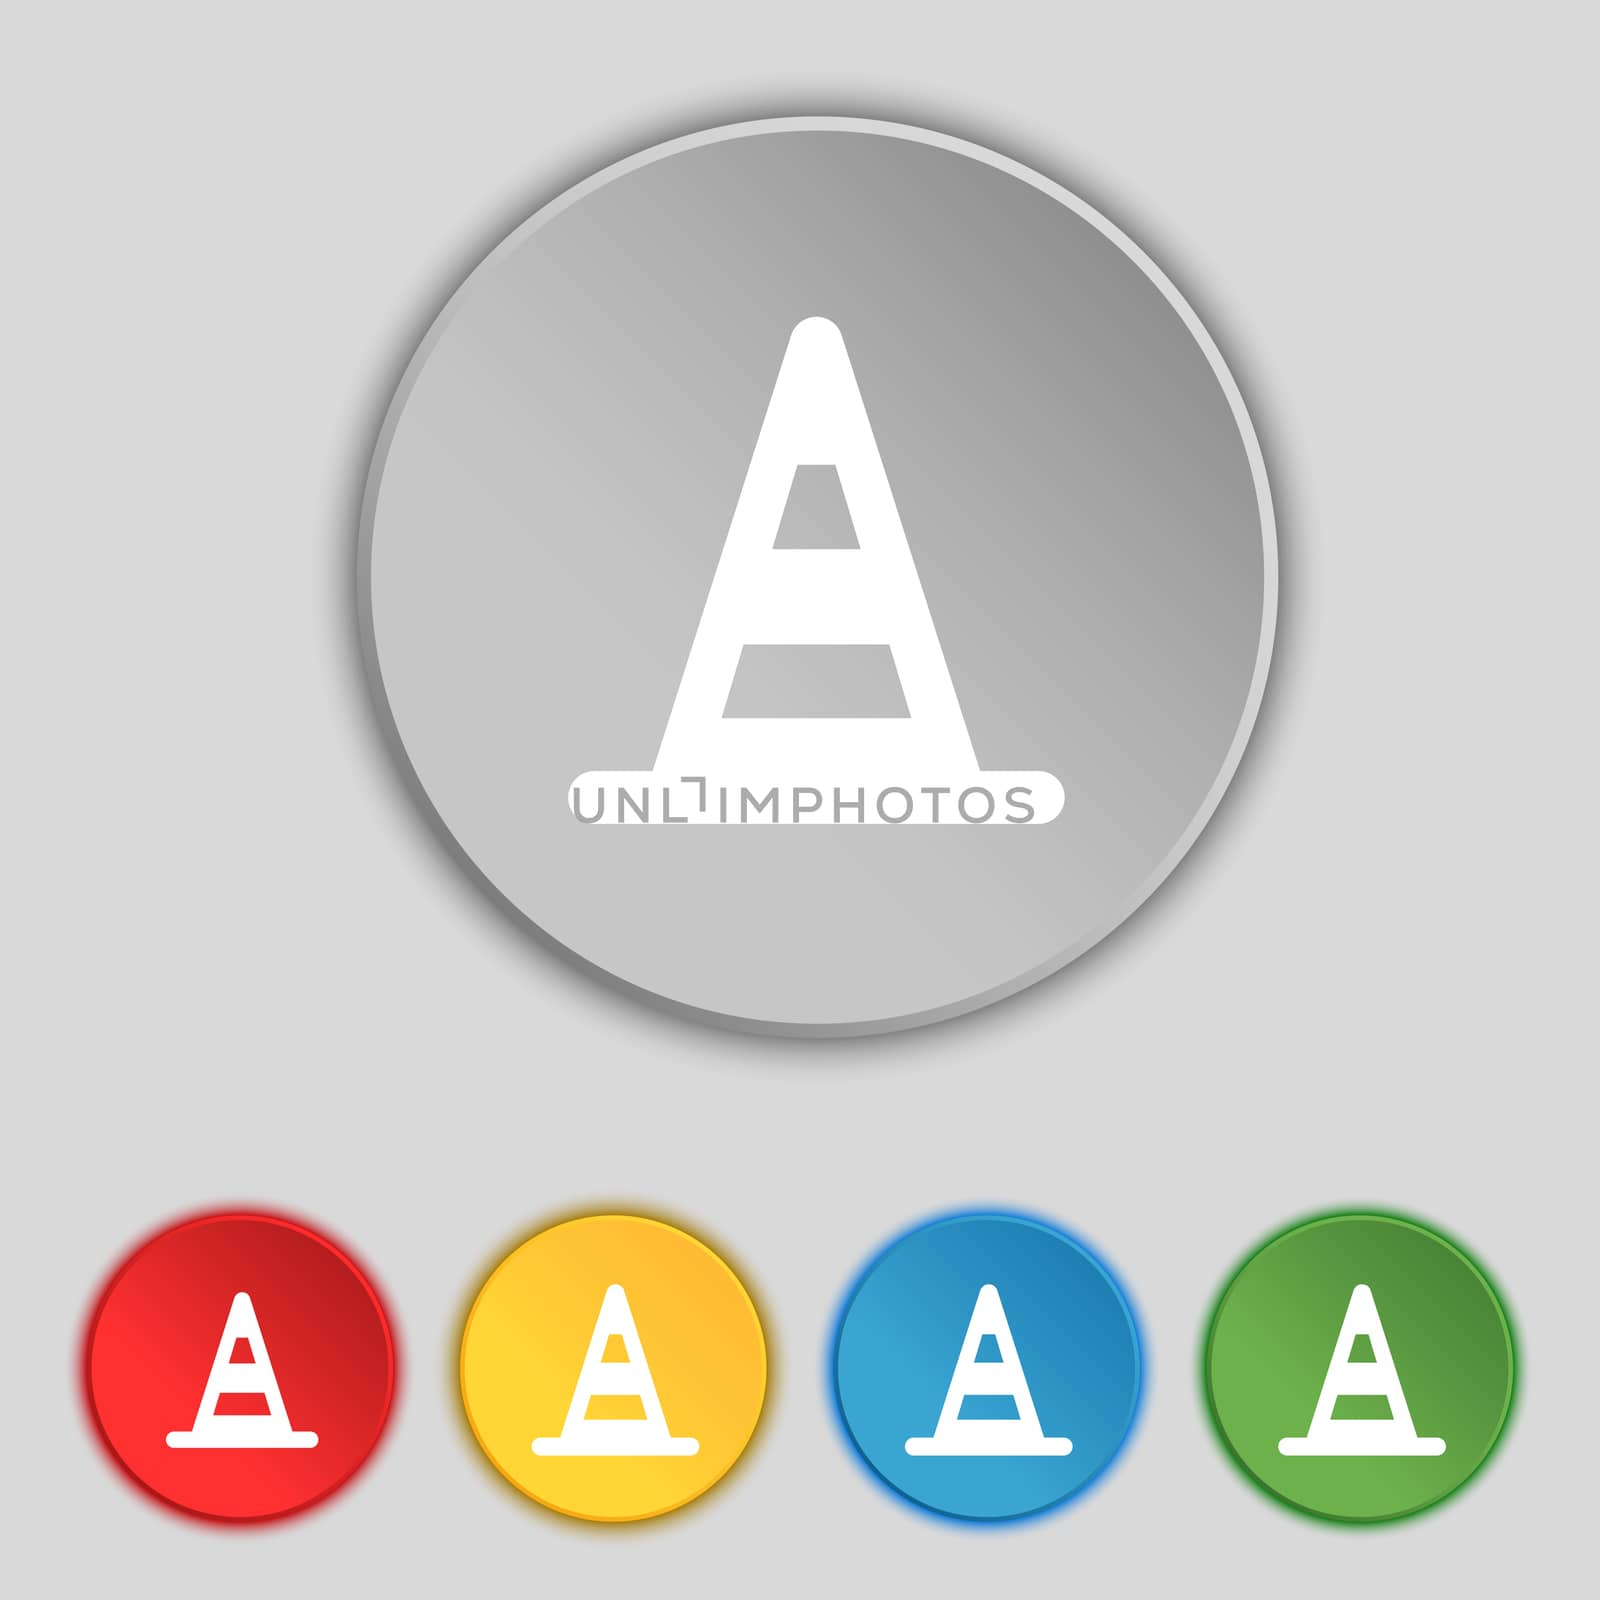 road cone icon sign. Symbol on five flat buttons. illustration